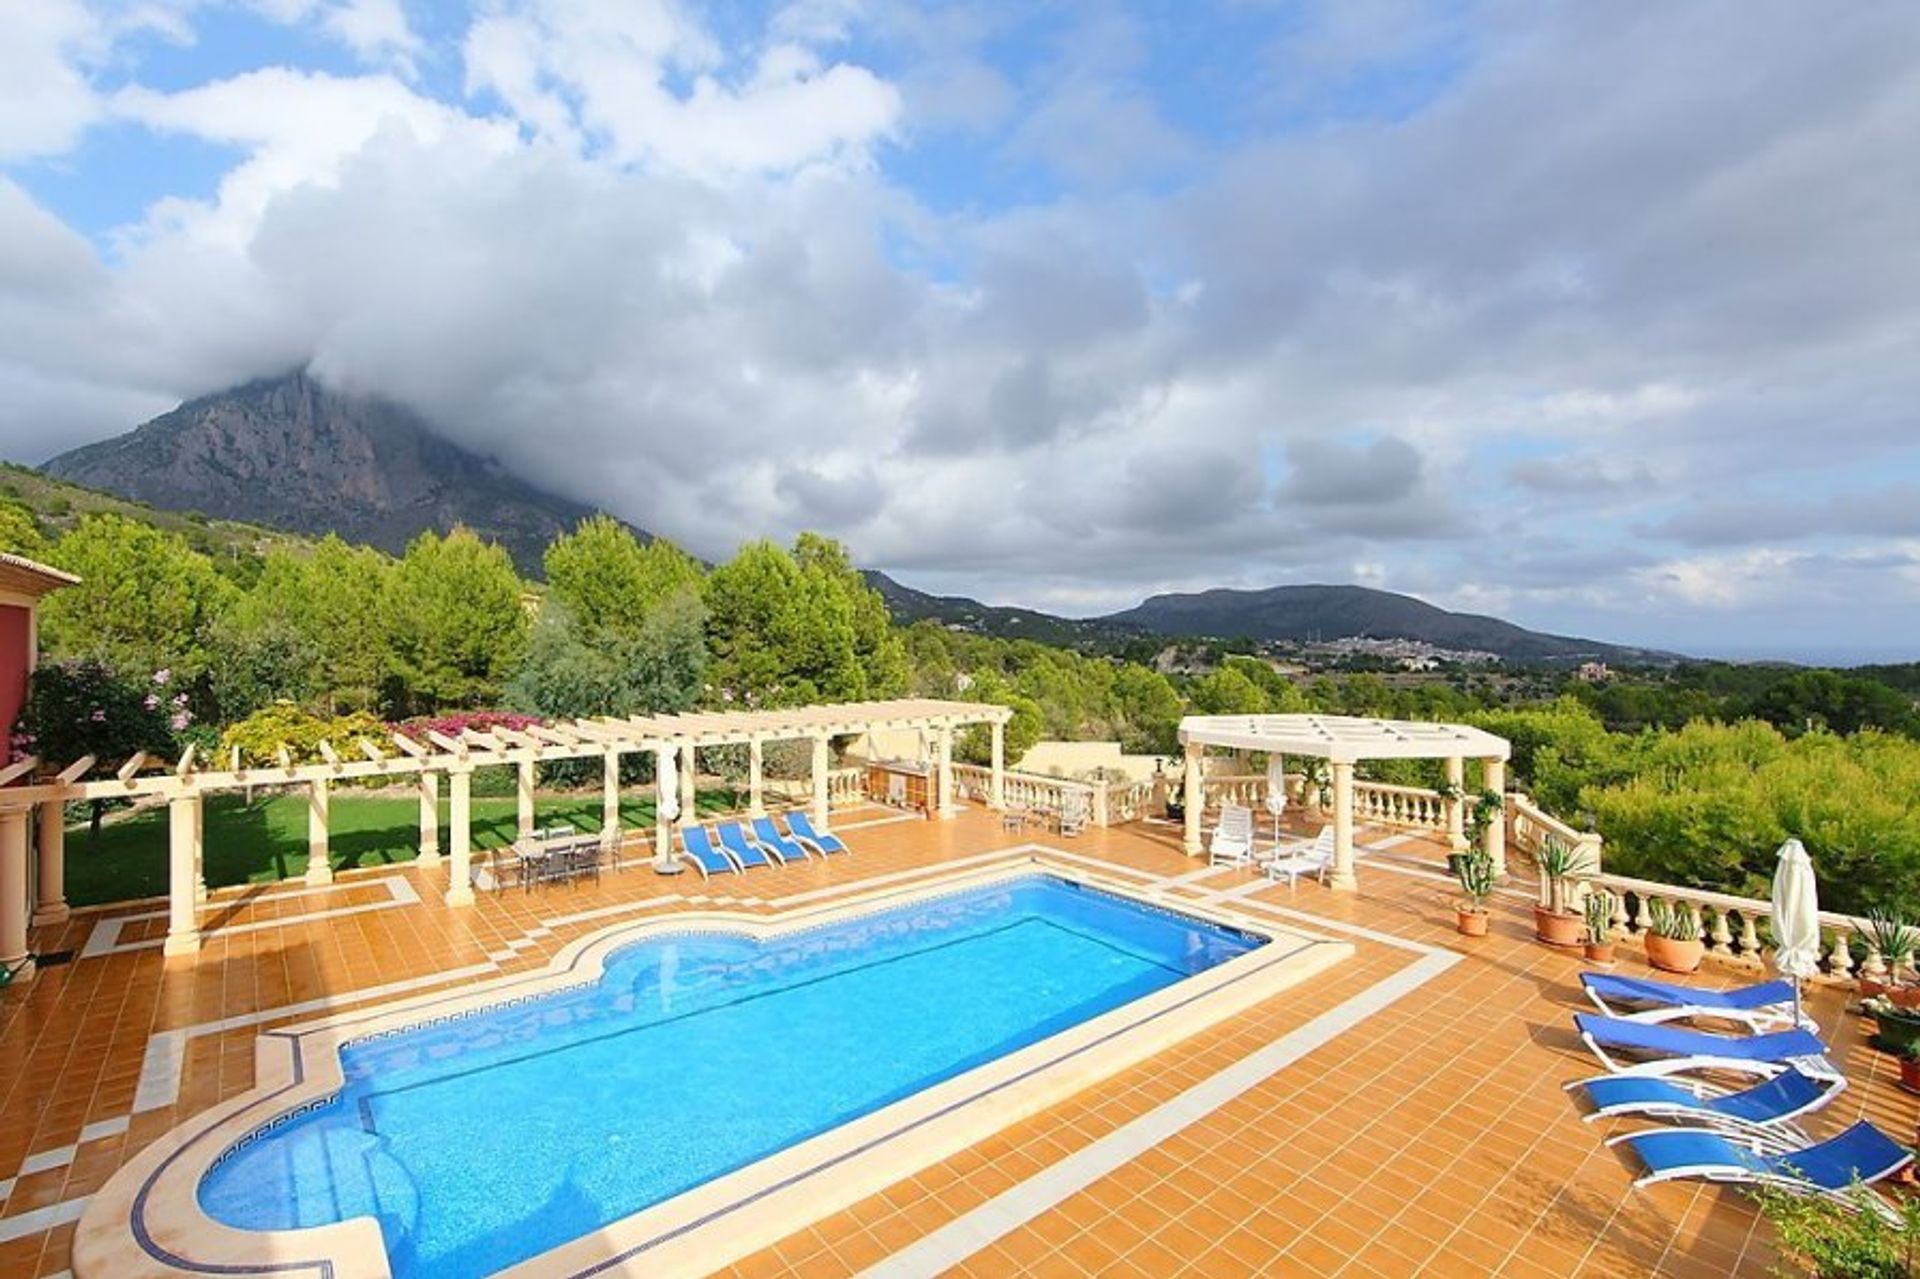 See our selection of villas with private pools overlooking the mountains and Cala Finestrat